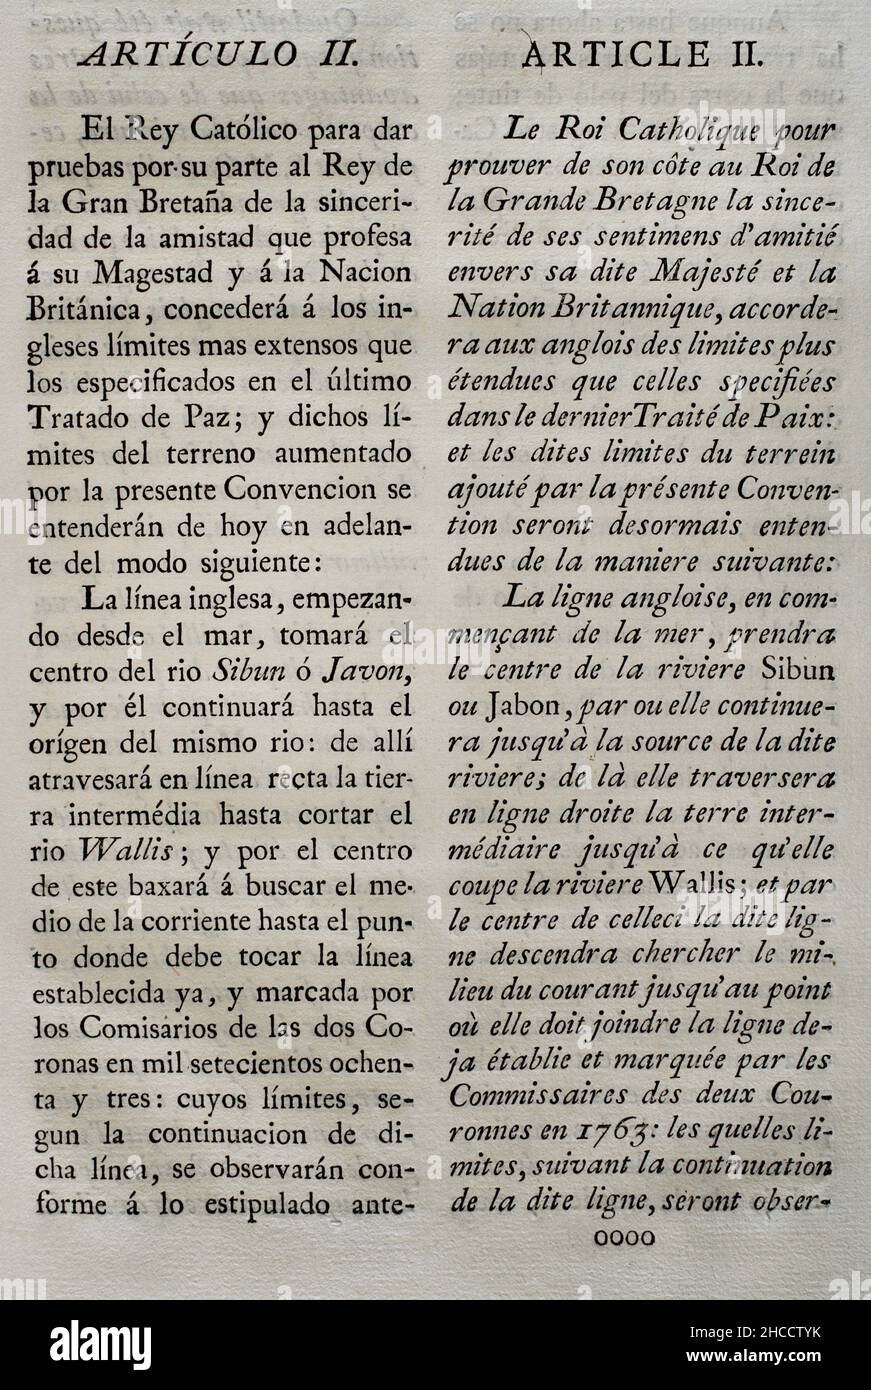 'Convention of London' (1786). Convention concluded between the King of Spain and the King of Great Britain, to explain, extend and give effect to the provisions of Article VI of the definitive peace treaty of 1783. It was signed in London on 14 July 1786; and ratified by both sovereigns (Charles III and George III of England). The agreement concerned the status of British settlements on the Mosquito Coast in Central America. Great Britain evacuated those settlements and, in exchange, Spain expanded the territory available to British lumberjacks on the Yucatan Peninsula. Article II. Collection Stock Photo